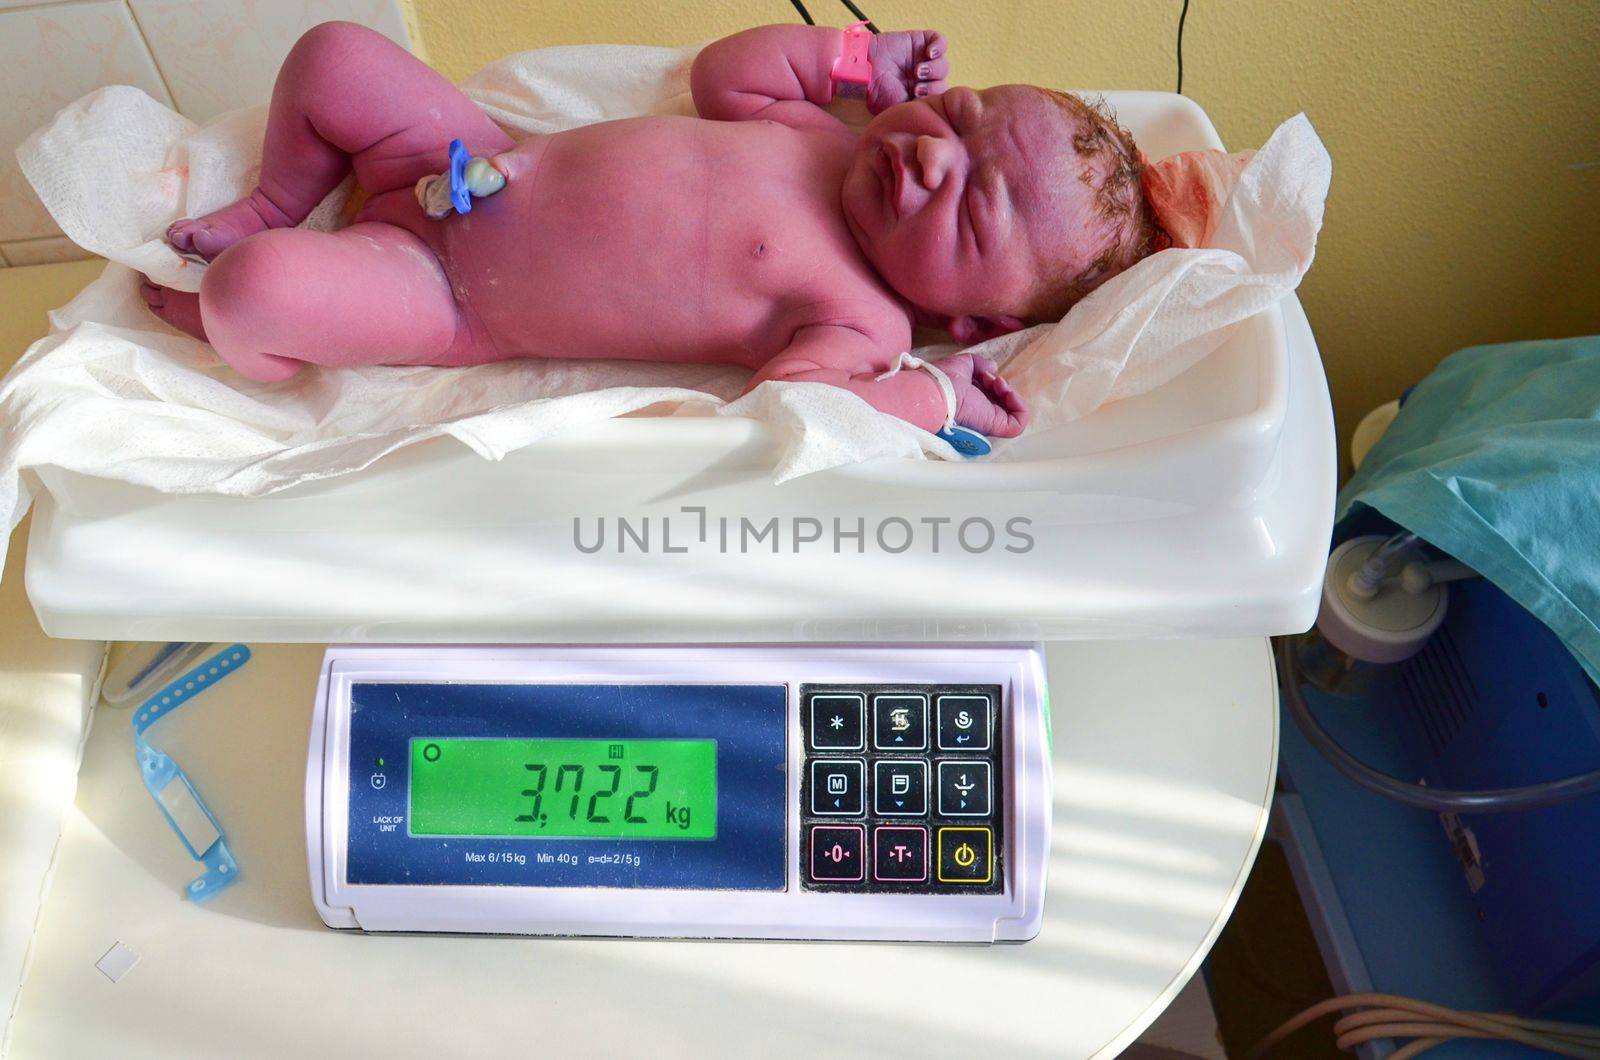 New born baby - girl with remainder of umbilical cord after successful childbirth. Real birthing and new born baby in a hospital. A healthy female newborn baby girl has been examined on the balance scale immediately after childbirth.